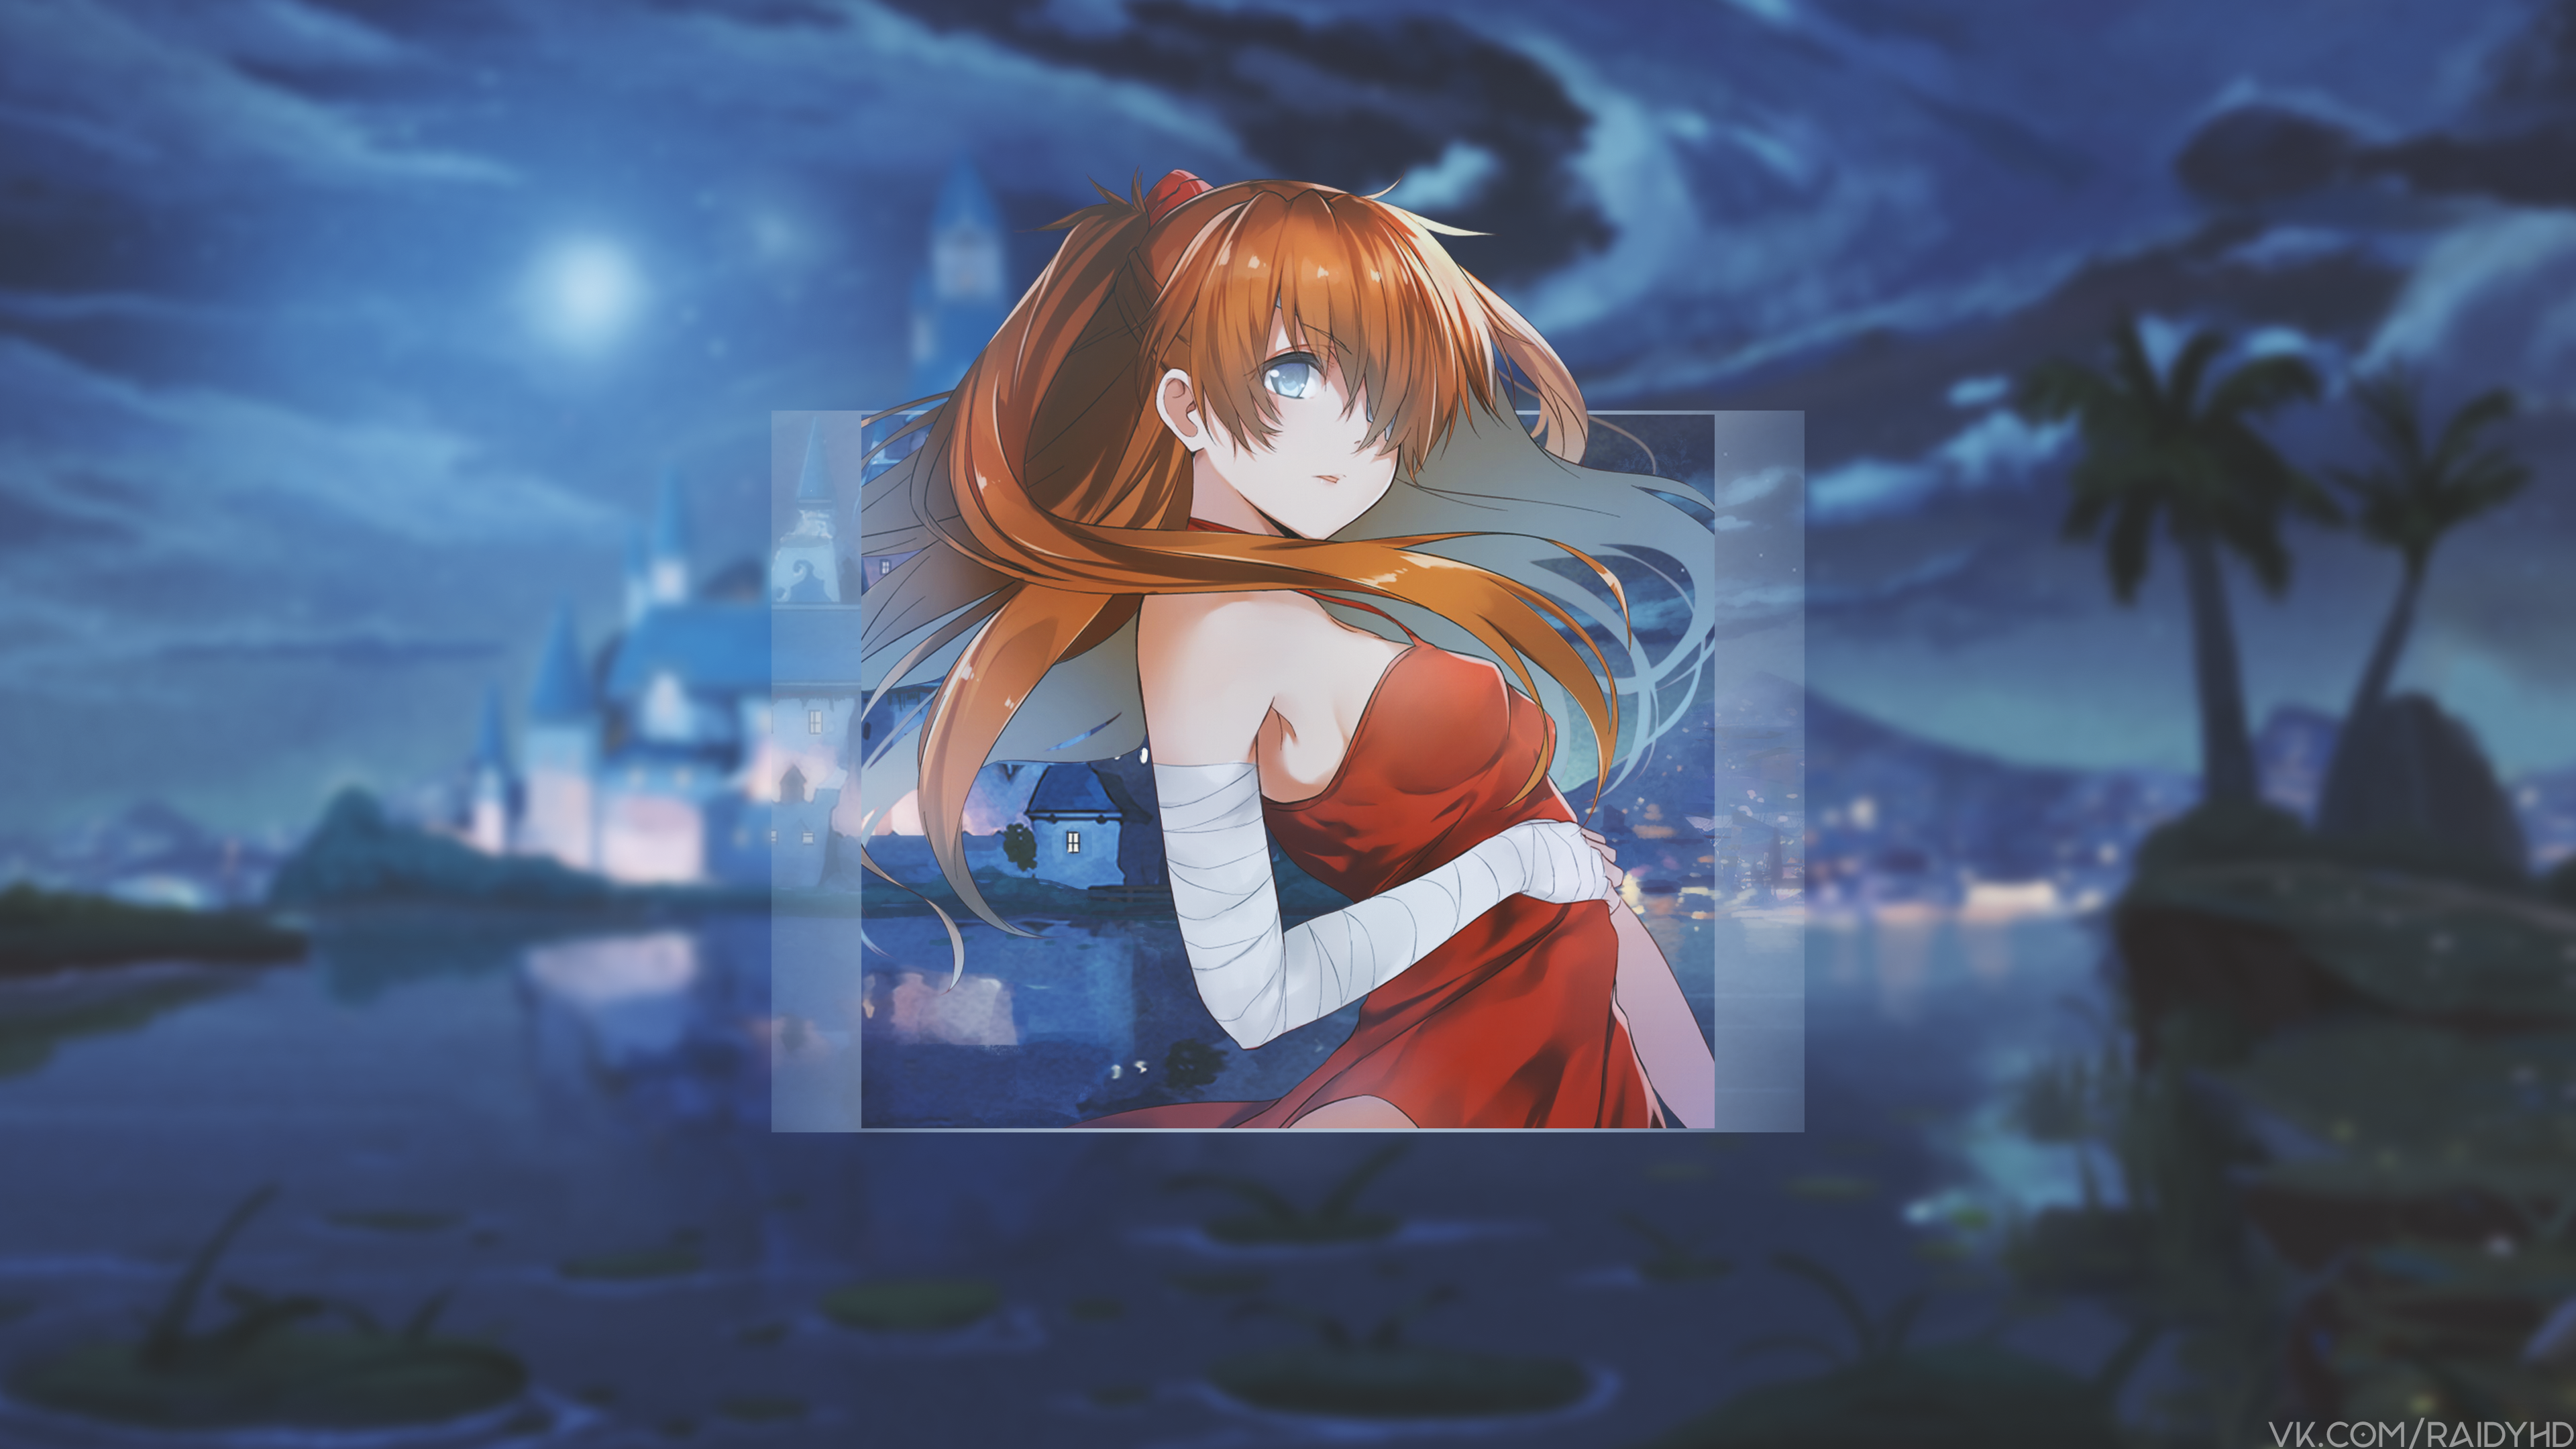 Anime 3840x2160 anime anime girls picture-in-picture Asuka Langley Soryu Neon Genesis Evangelion